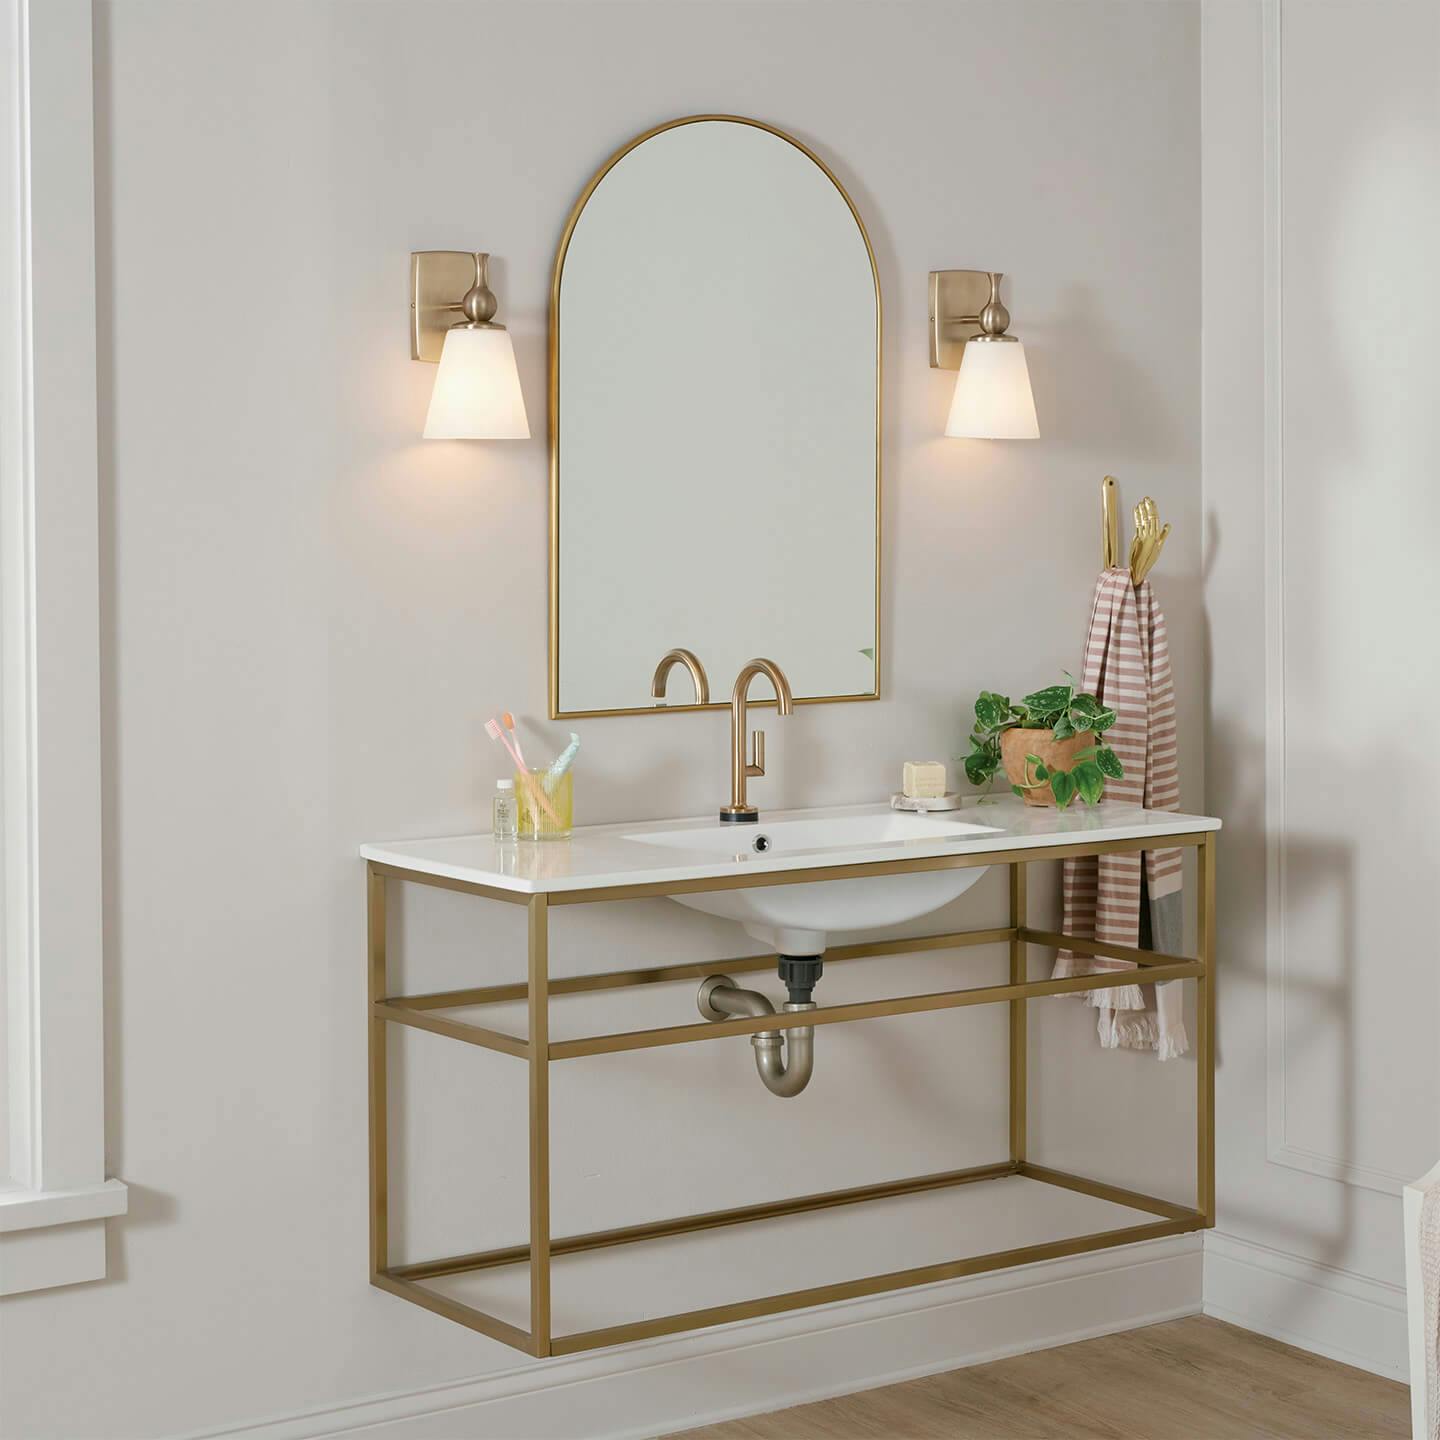 Cosabella Wall Sconces mounted on both sides of a bathroom mirror